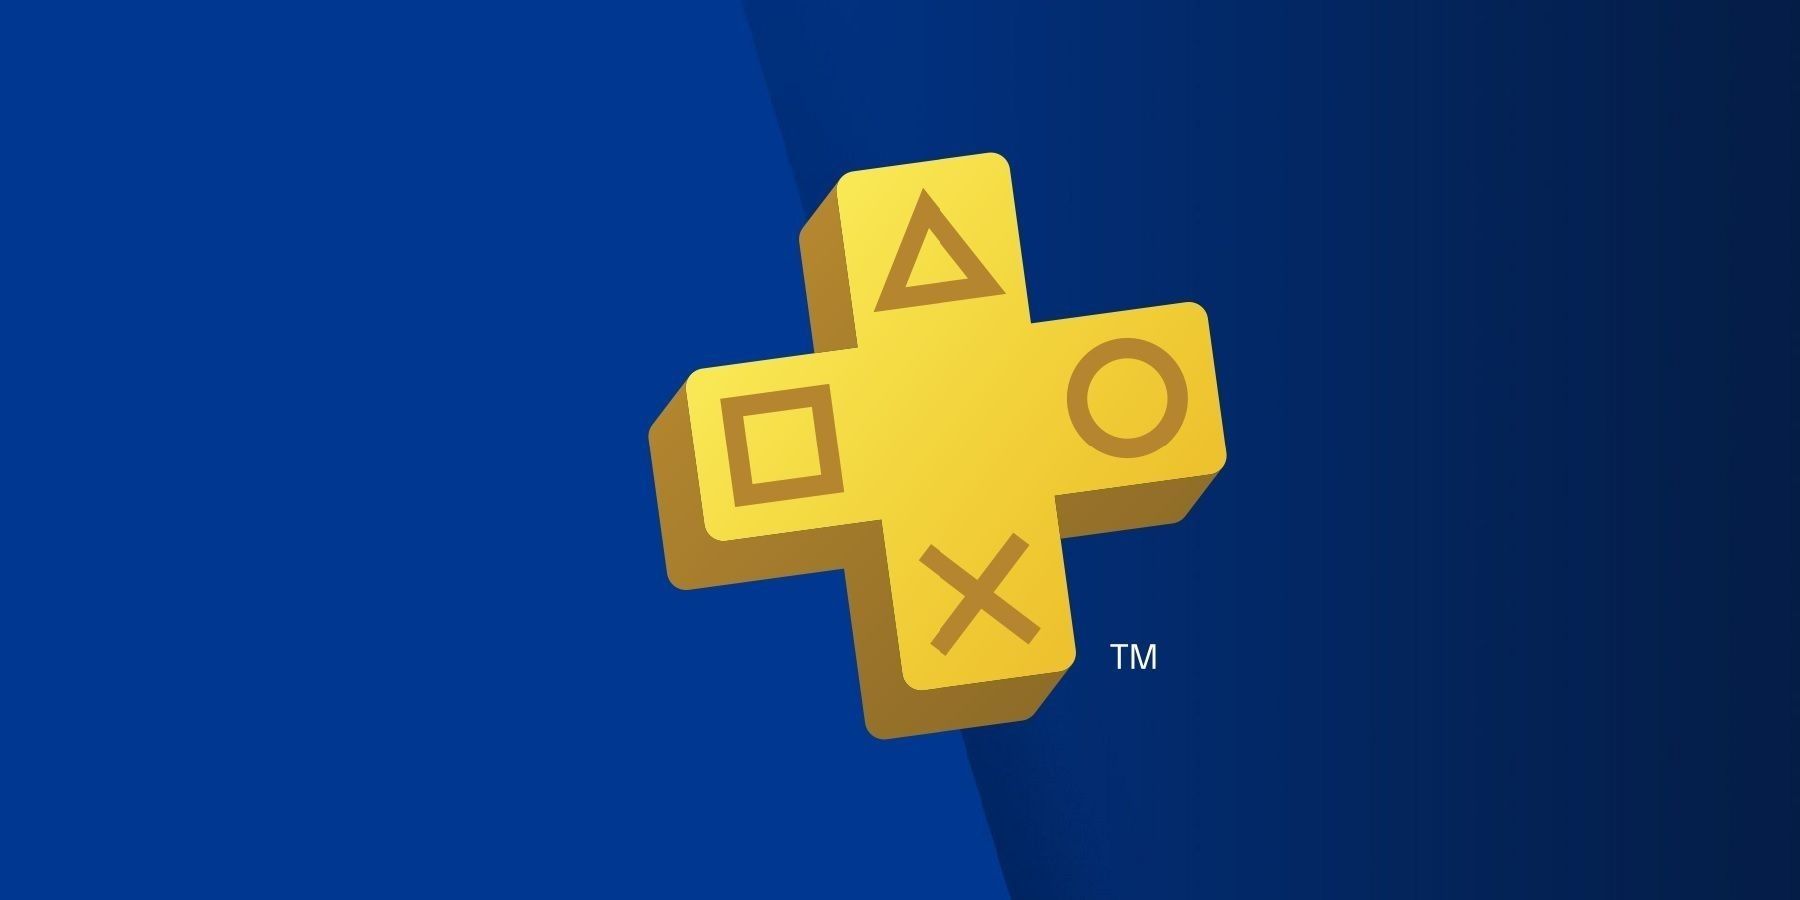 10 Games Leaving PS Plus Extra & Premium This July